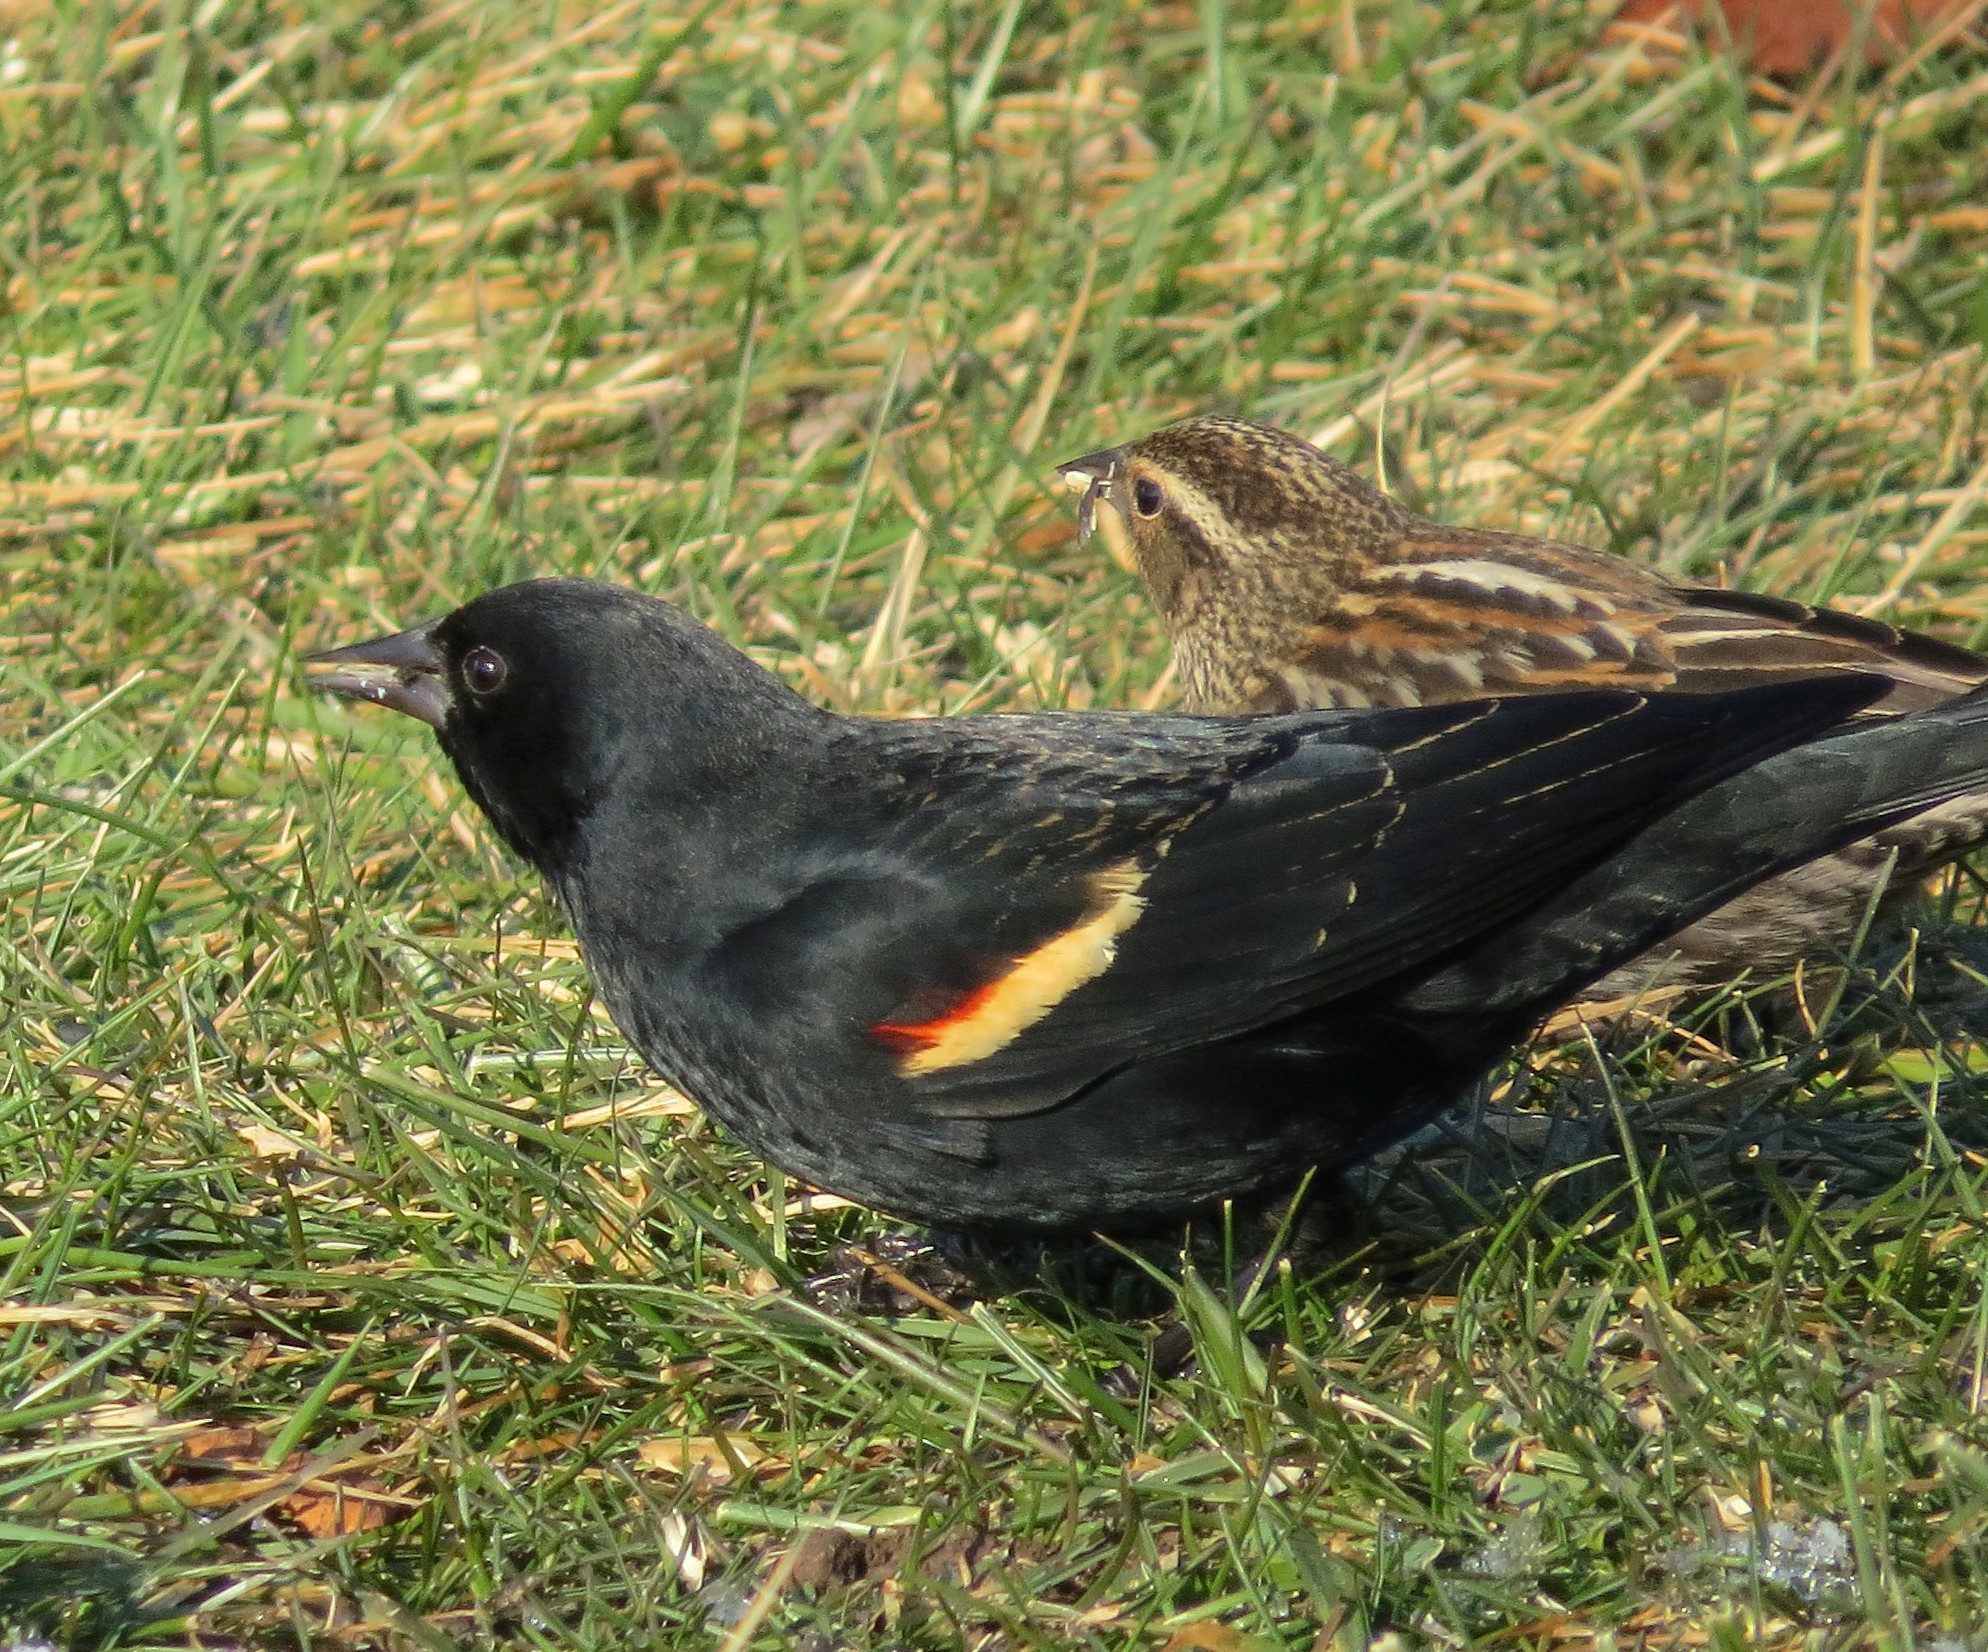 The male Red-winged Blackbird is glossy-black with a red and yellow patch on the wing called an epaulet. The female is streaky brown, and can be mistaken for a sparrow. Note her long, pointed bill, which a sparrow would not have. 